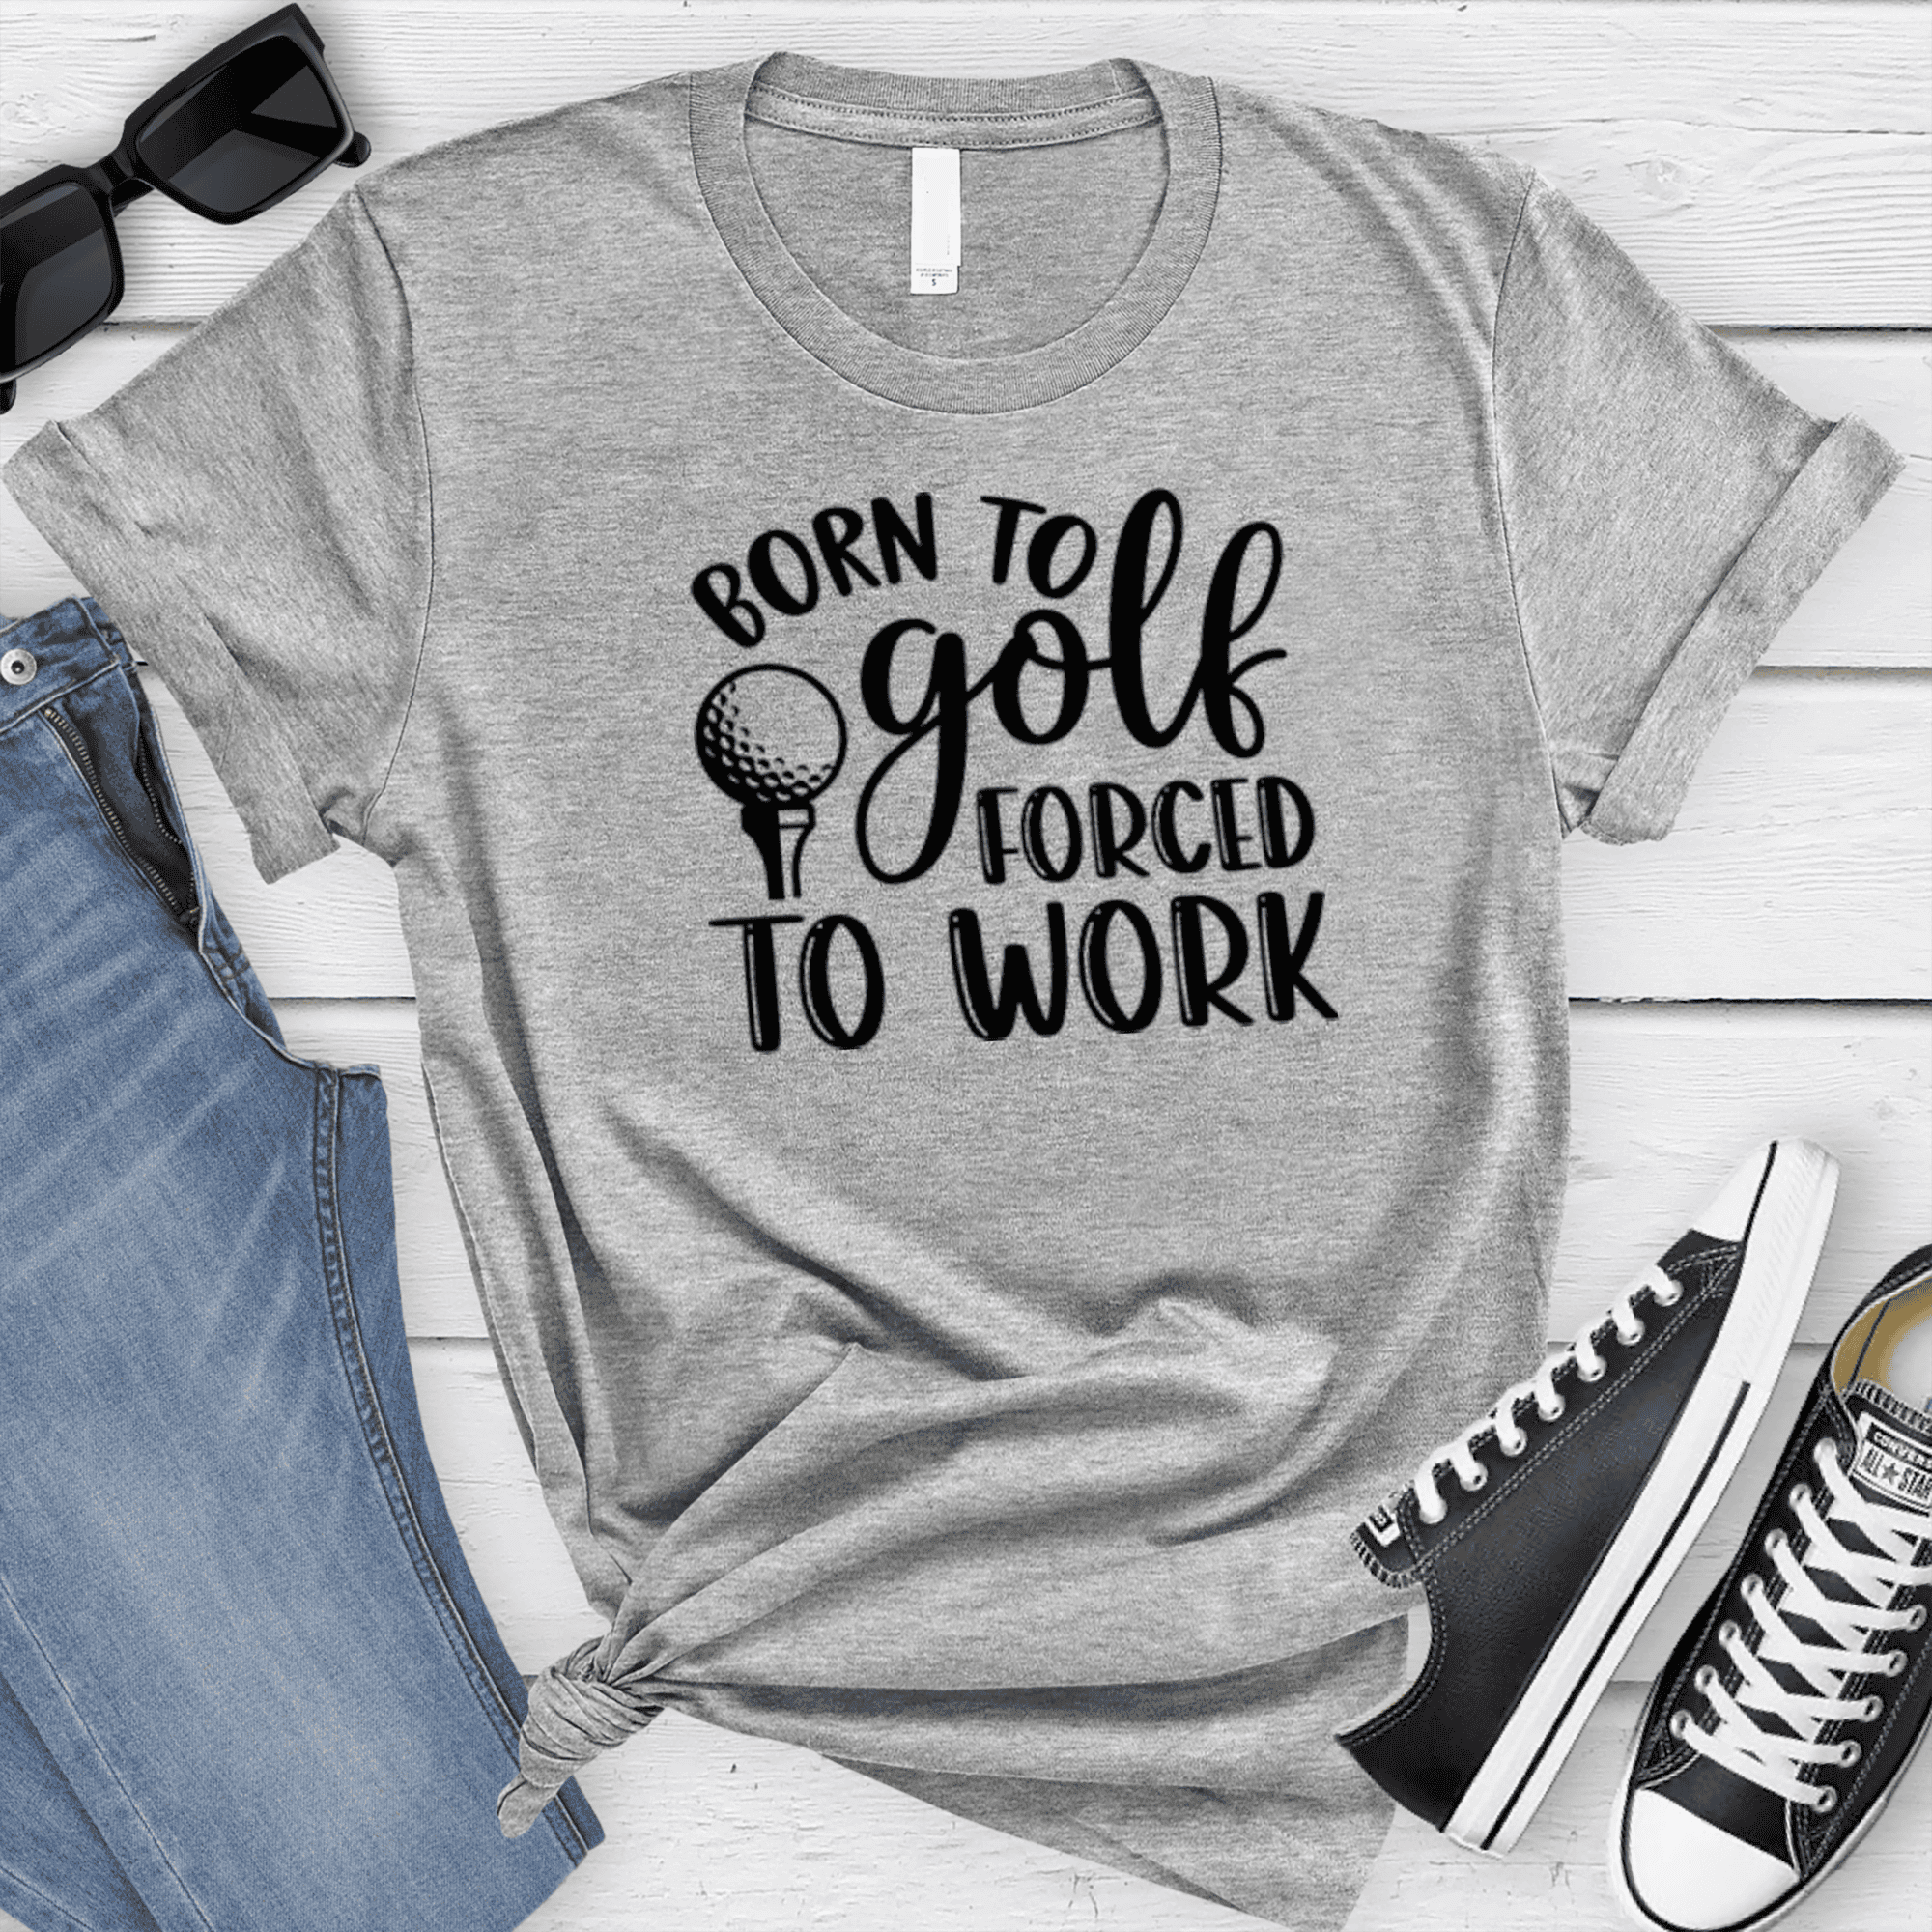 Womens Grey T Shirt with This-Girls-Born-To-Golf design